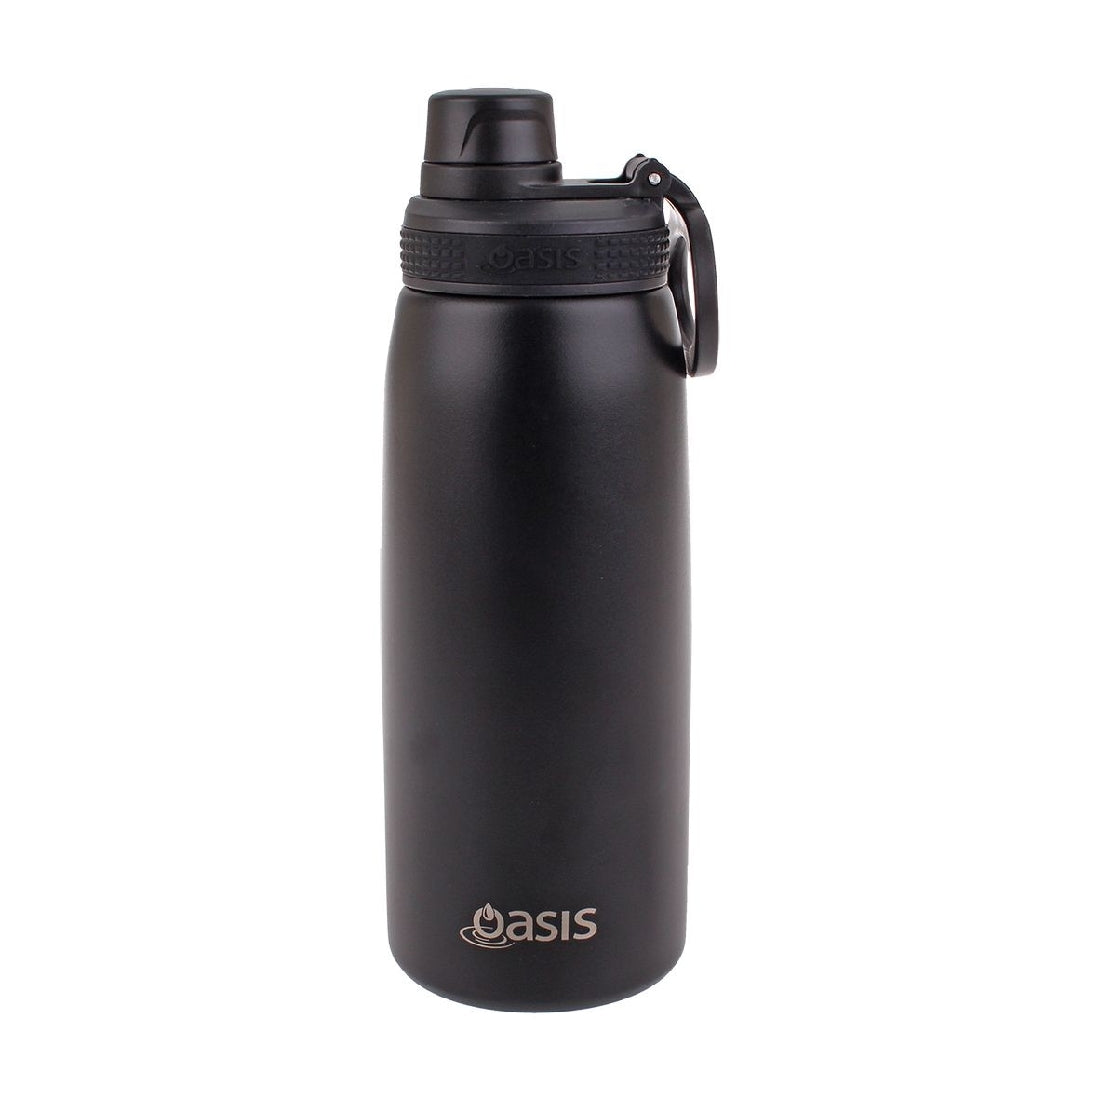 Oasis S/s Double Wall Insulated Sports Bottle W/ Screw-cap 780ml - Black